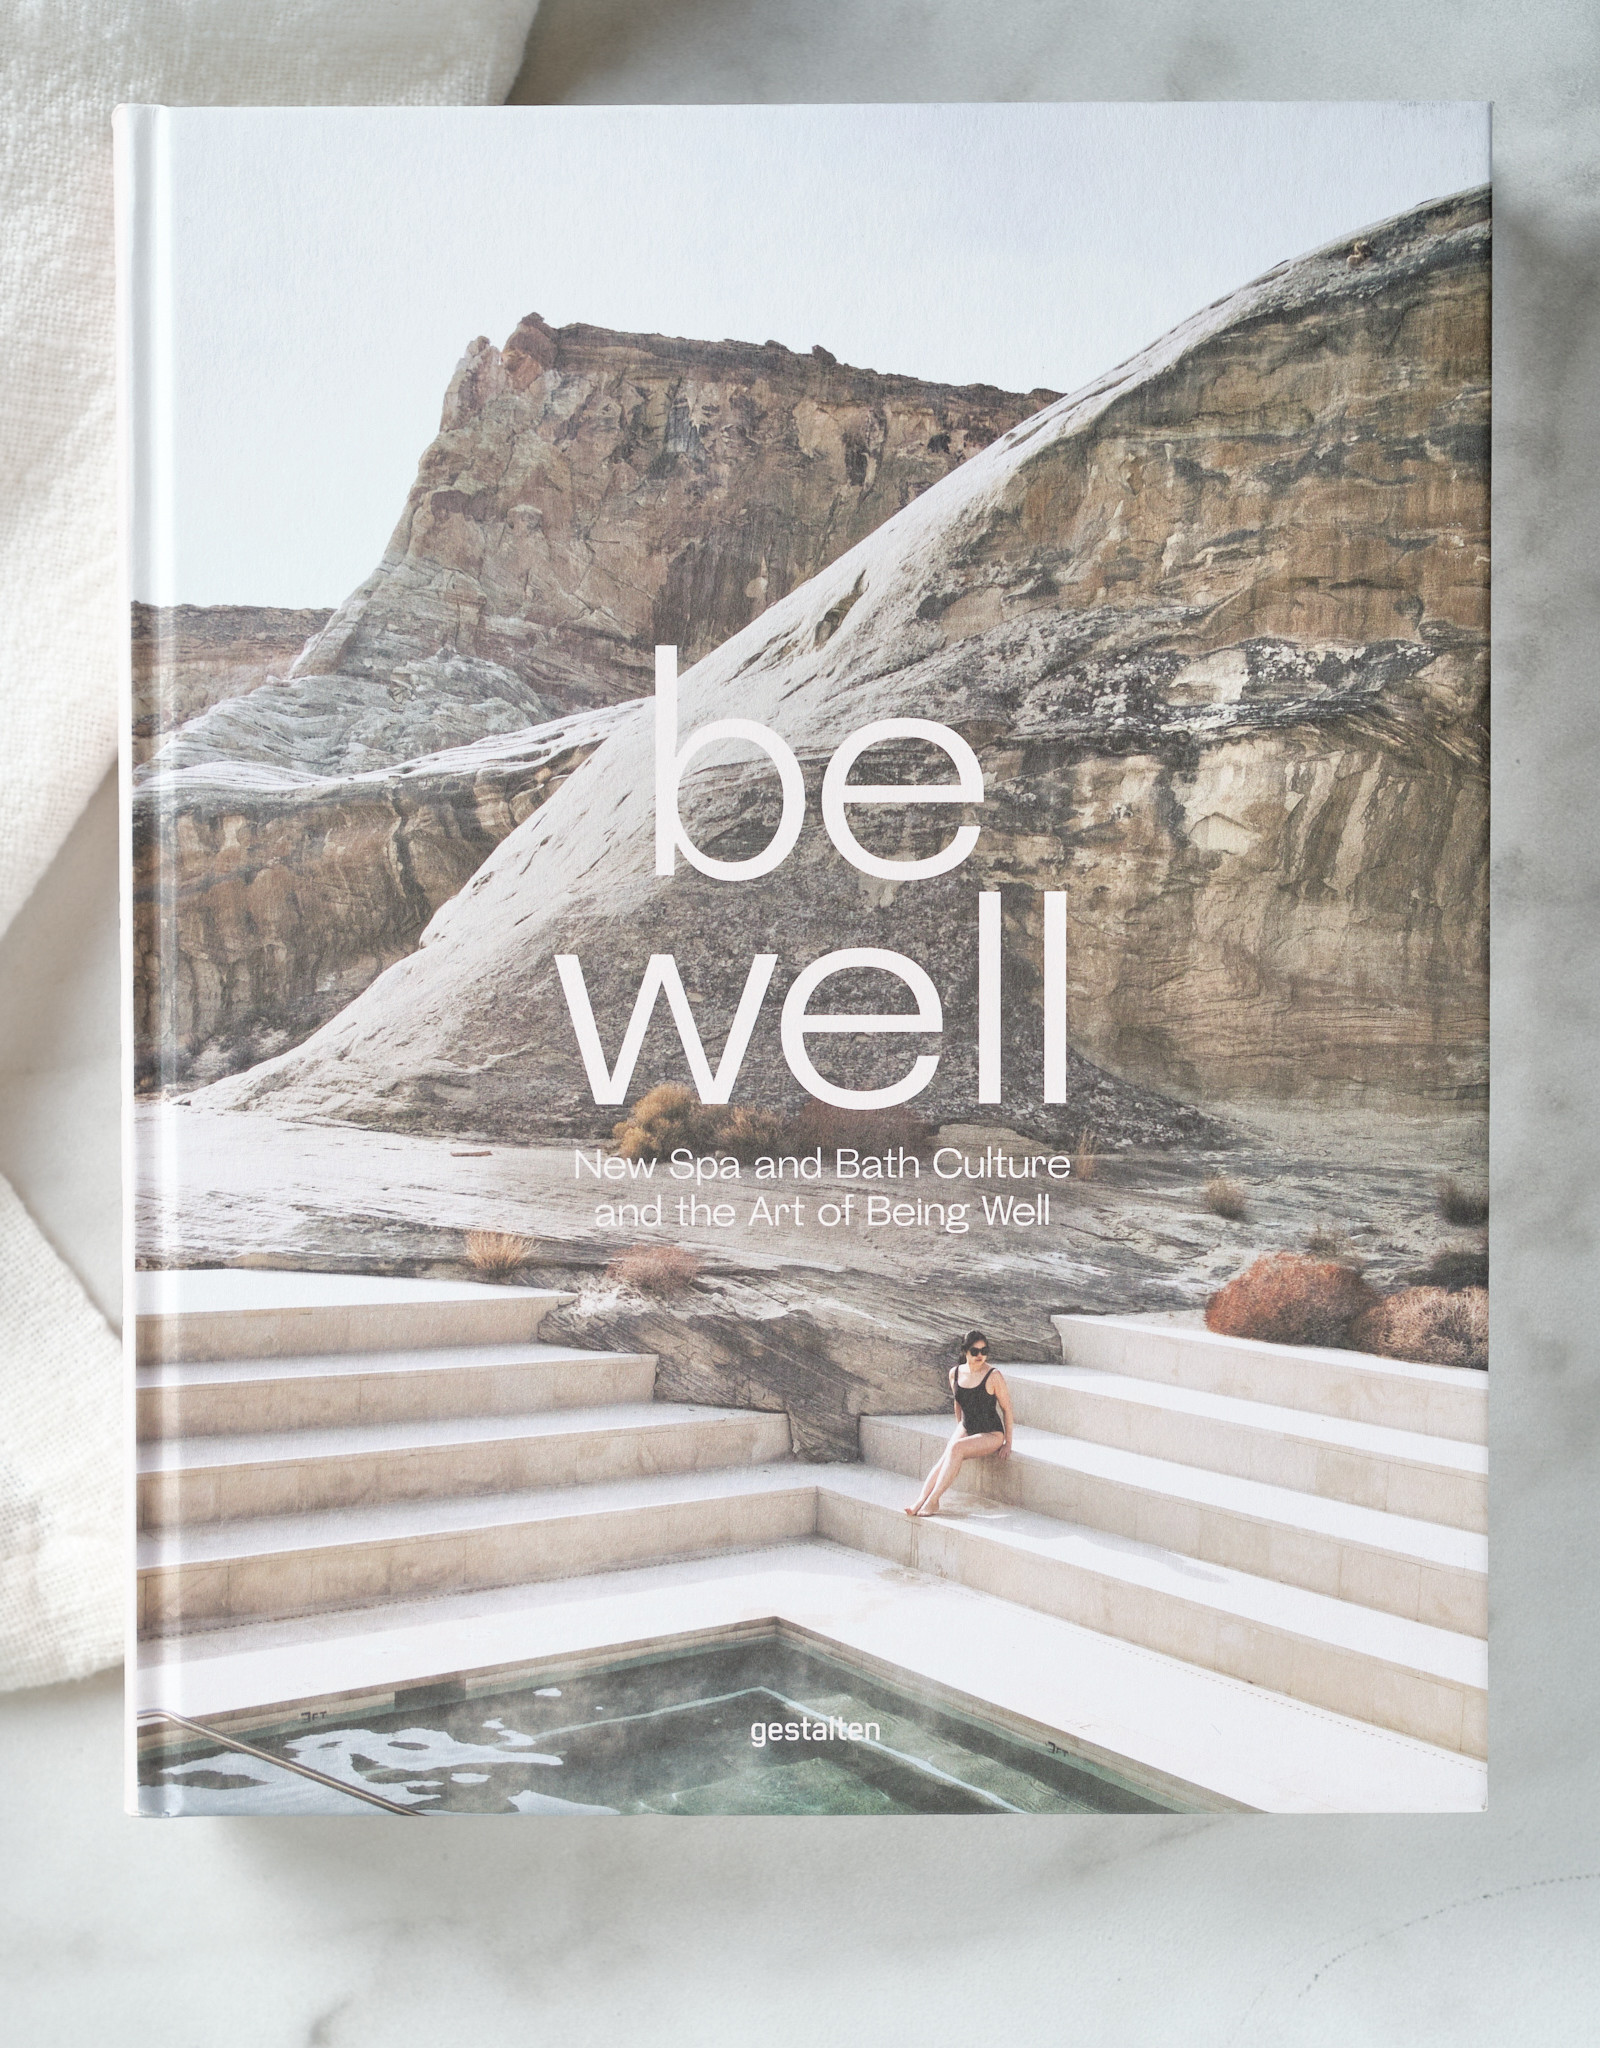 Be Well Book